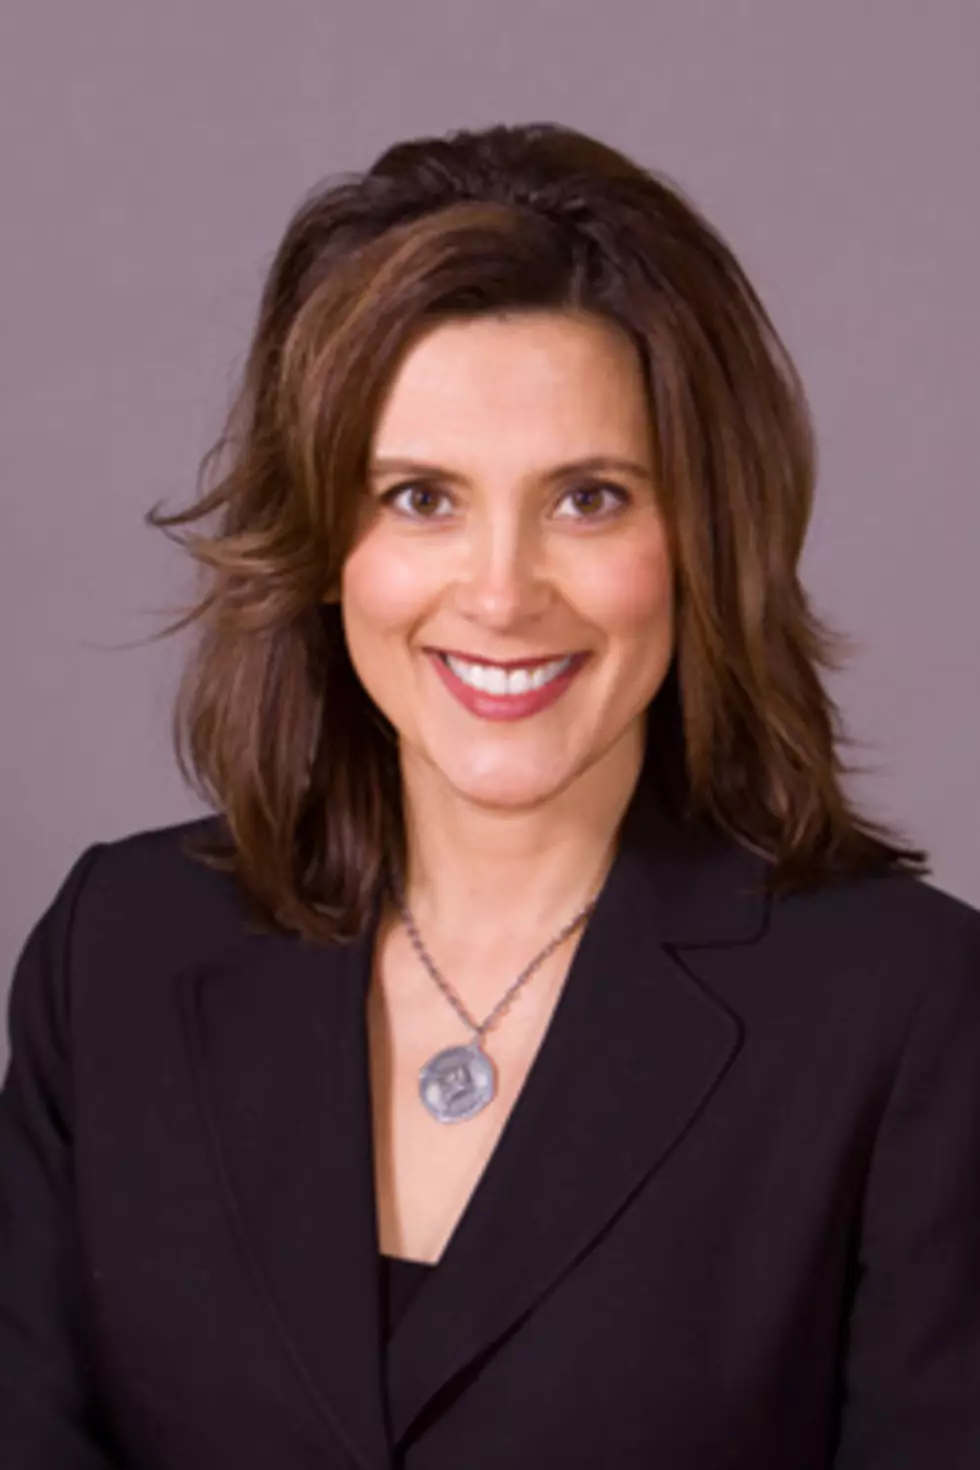 Gretchen Whitmer Is Running for Governor of Michigan